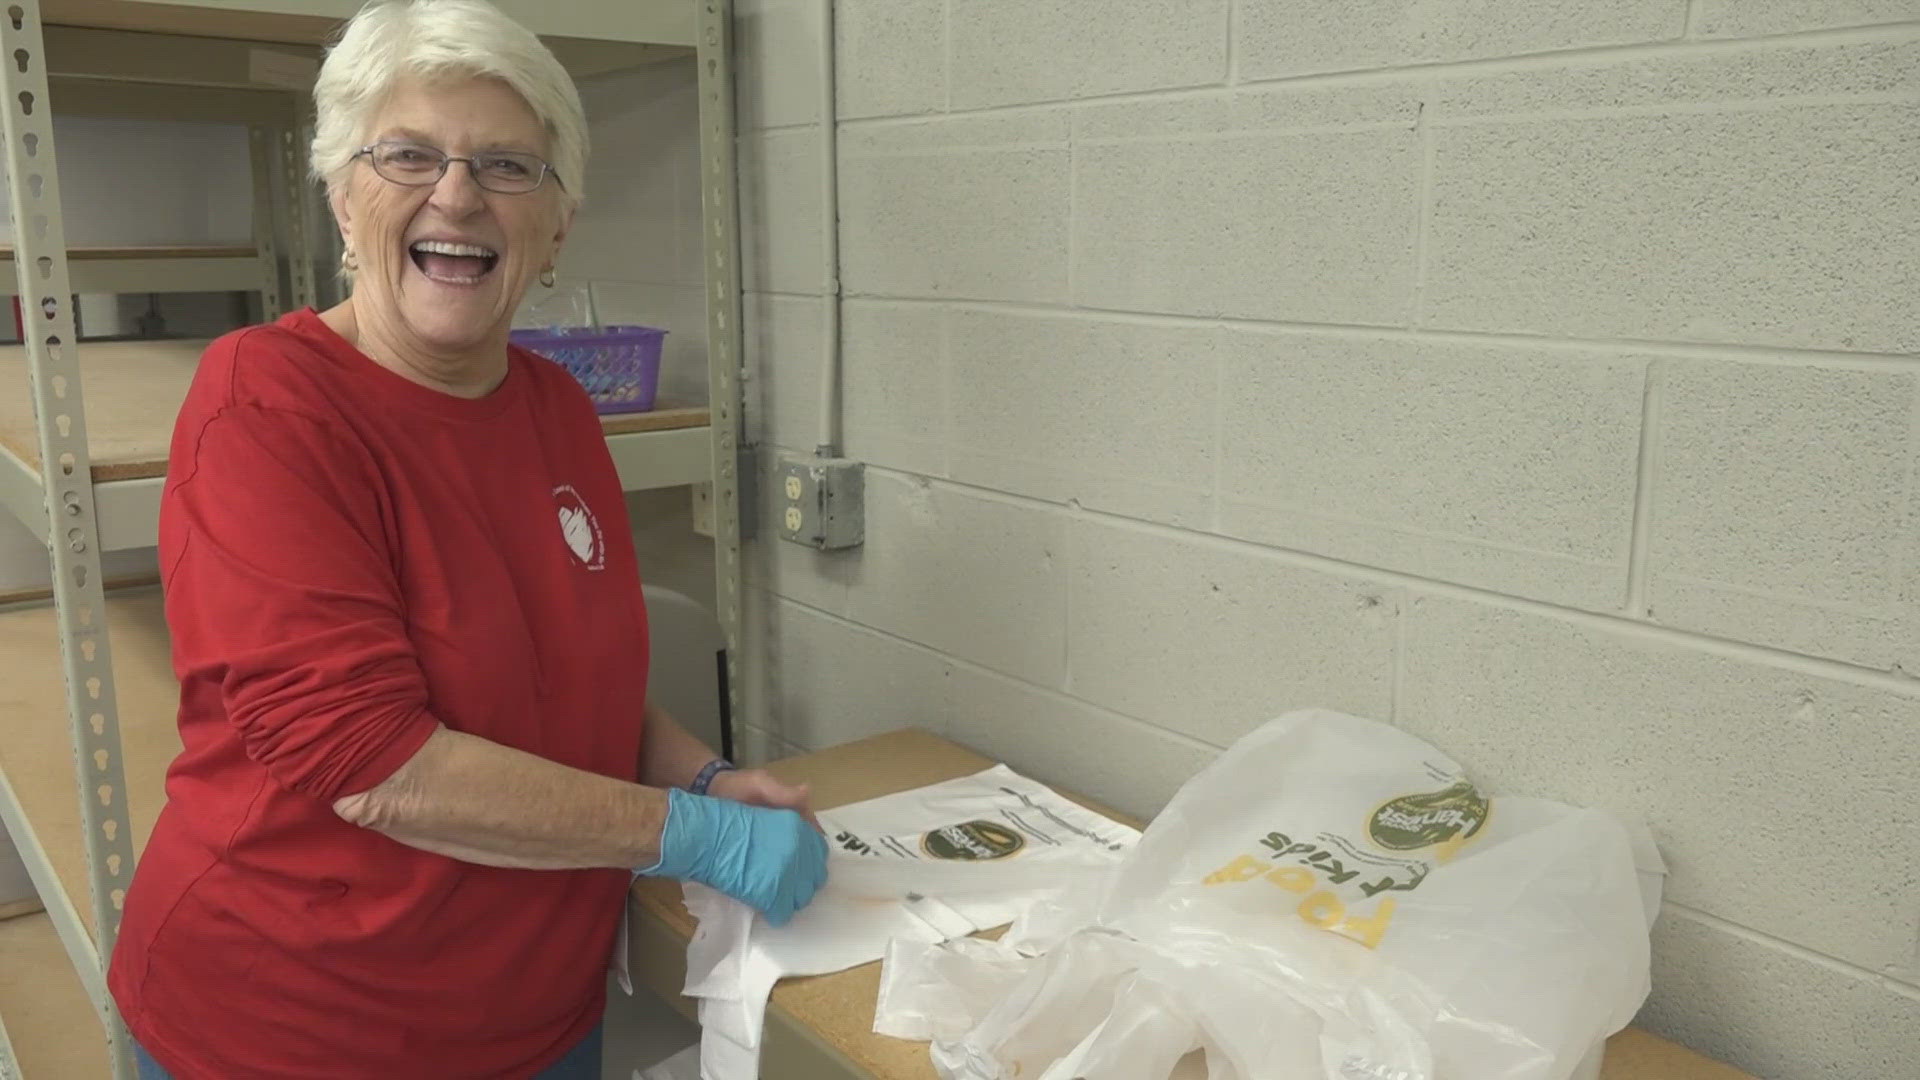 The “Pack the Bag” campaign is a community effort for one local church.